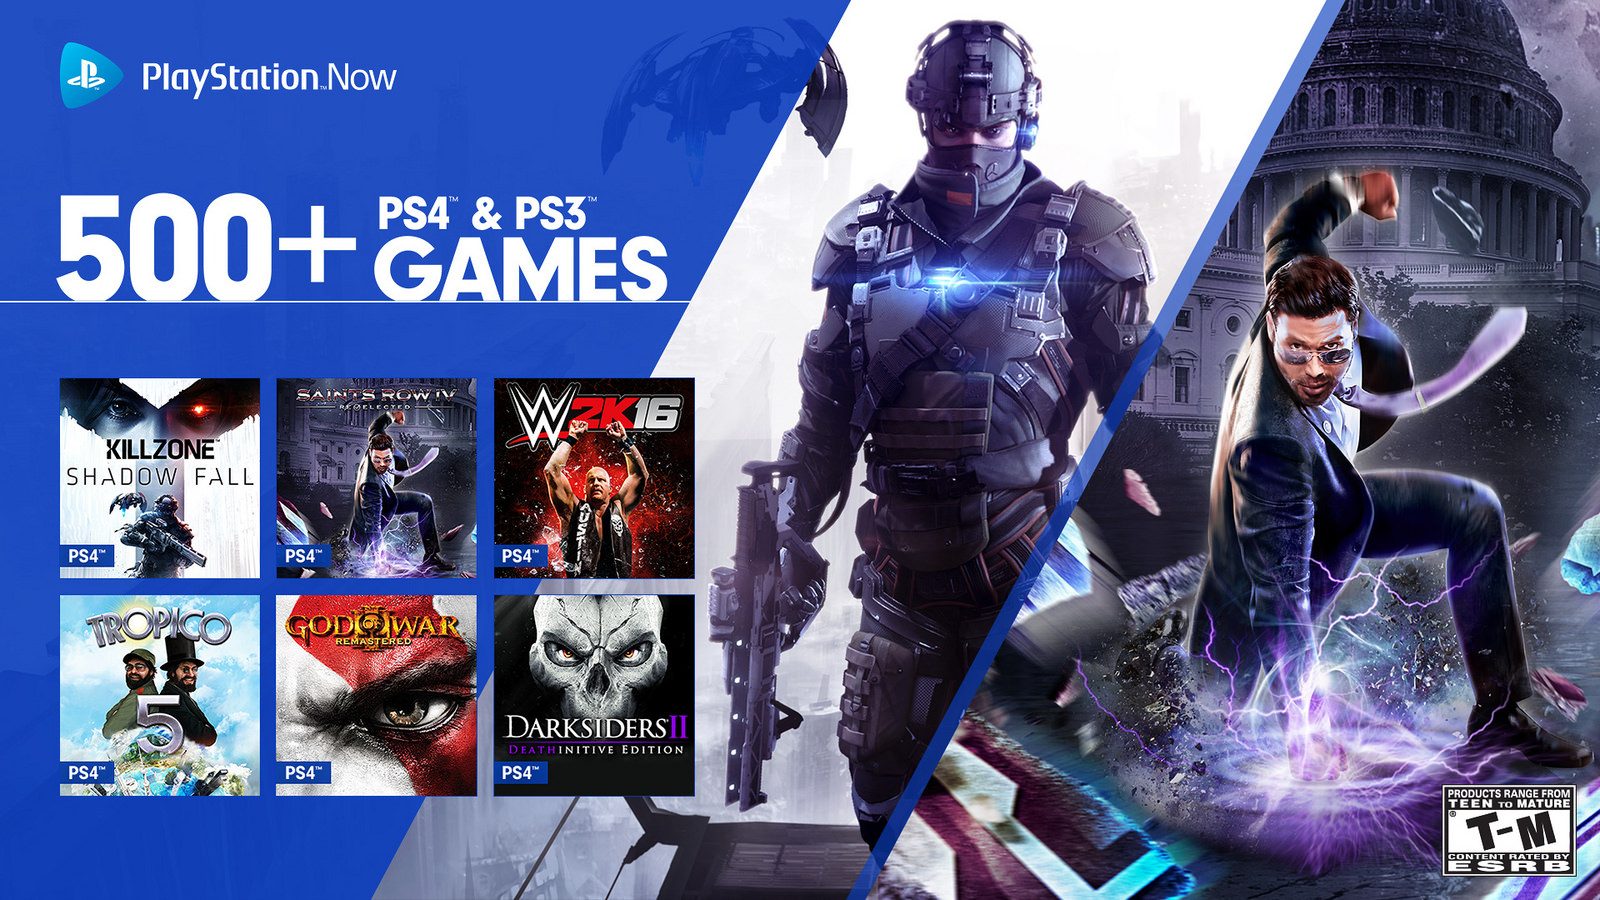 ps4 games popular now